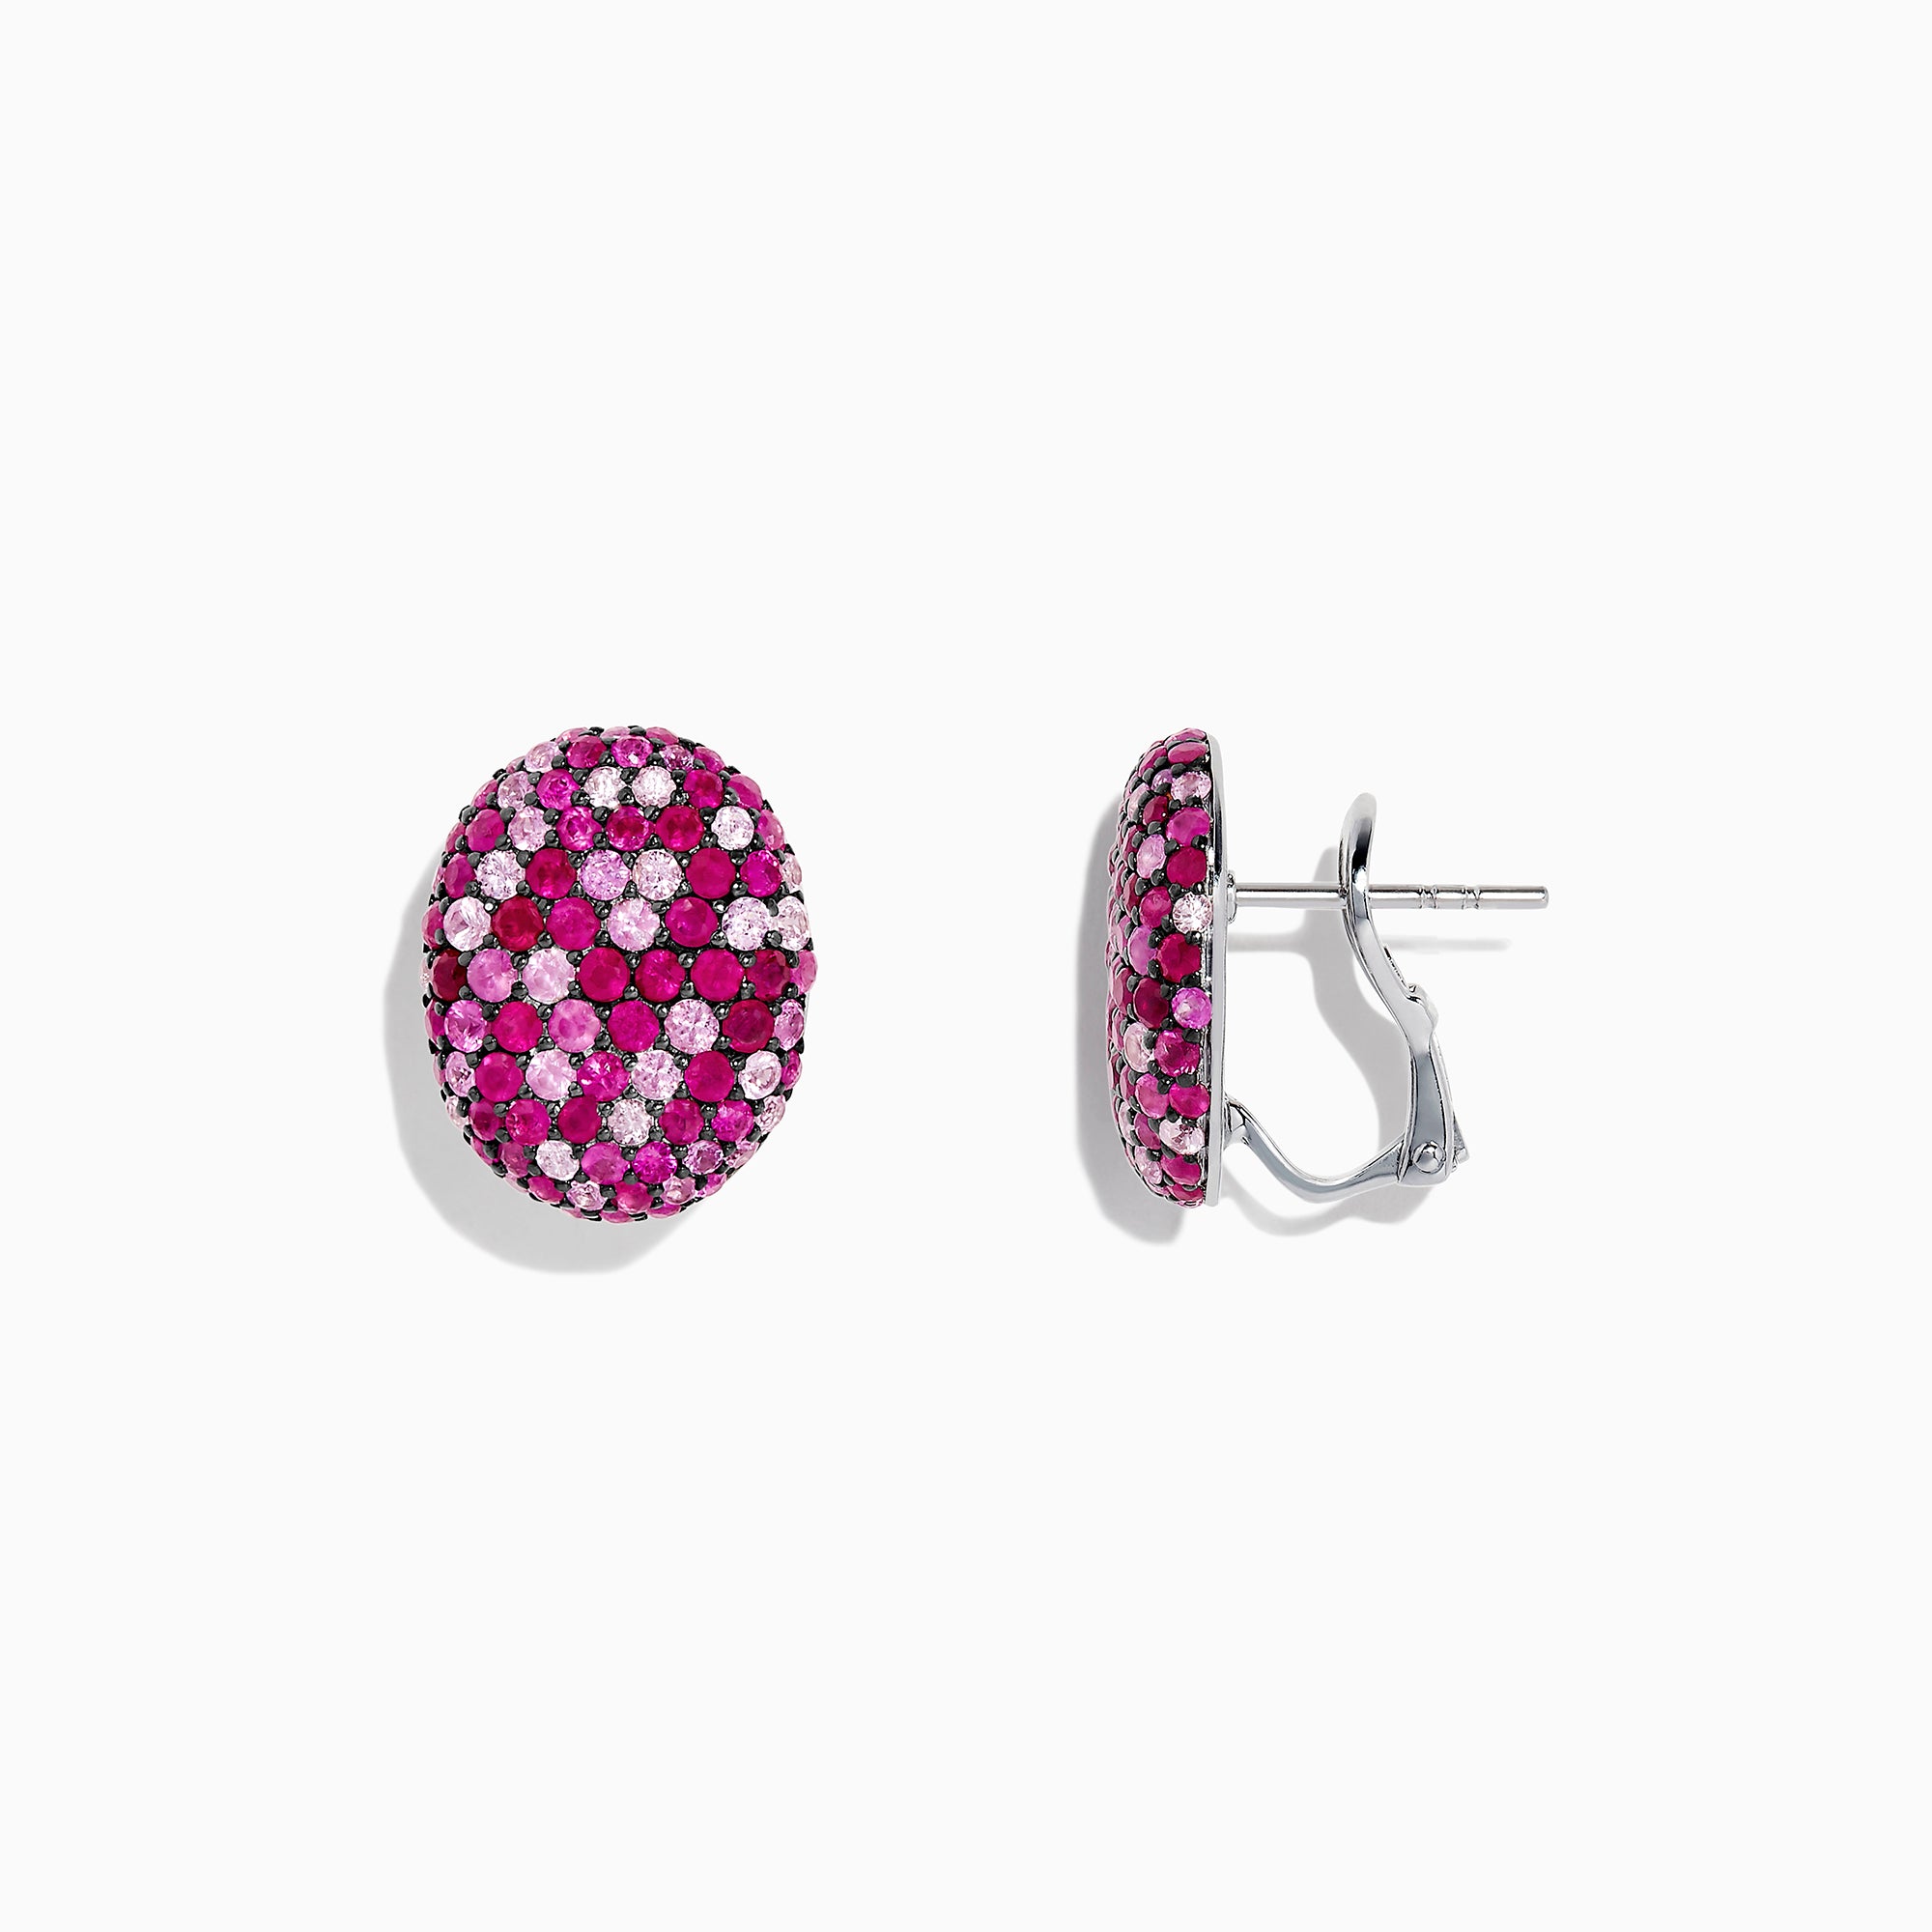 Effy Splash Sterling Silver Pink Sapphire and Ruby Oval Earrings, 3.12 TCW